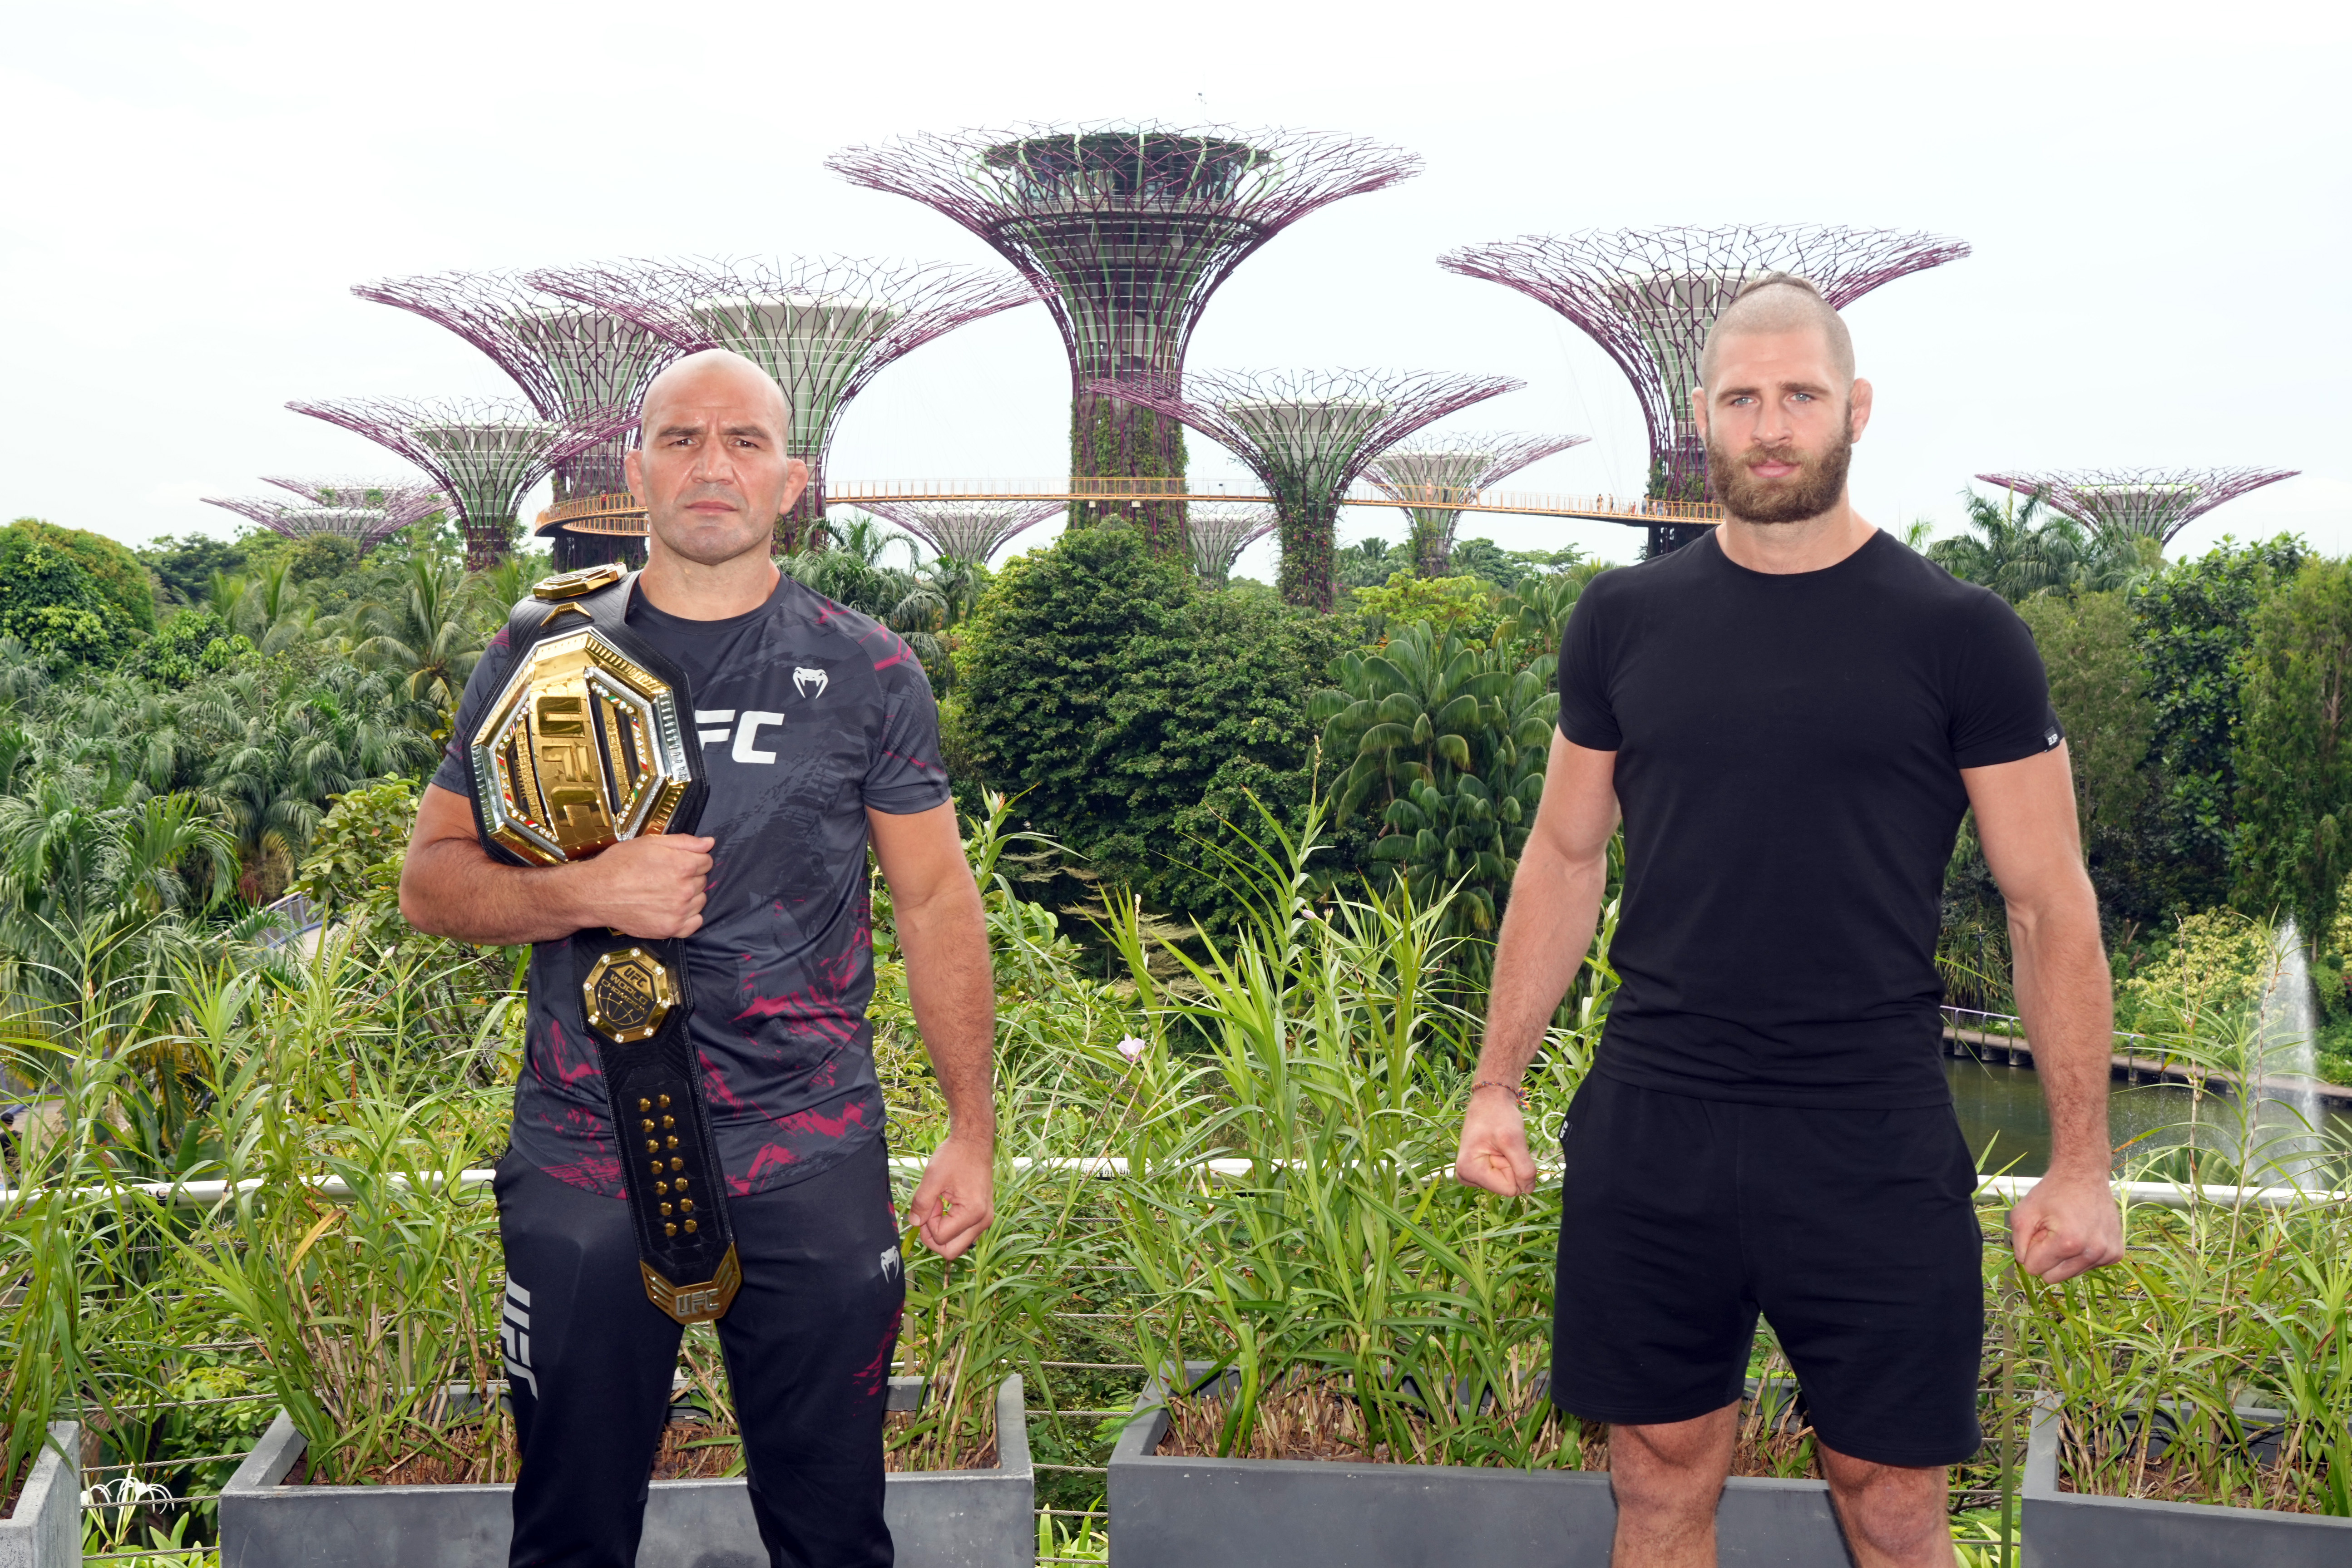 UFC light heavyweight champion Glover Texeira of Brazil and Jiri Prochazka of Czech Republic pose during a UFC photo session at Gardens by the Bay on June 7, 2022 in Singapore.